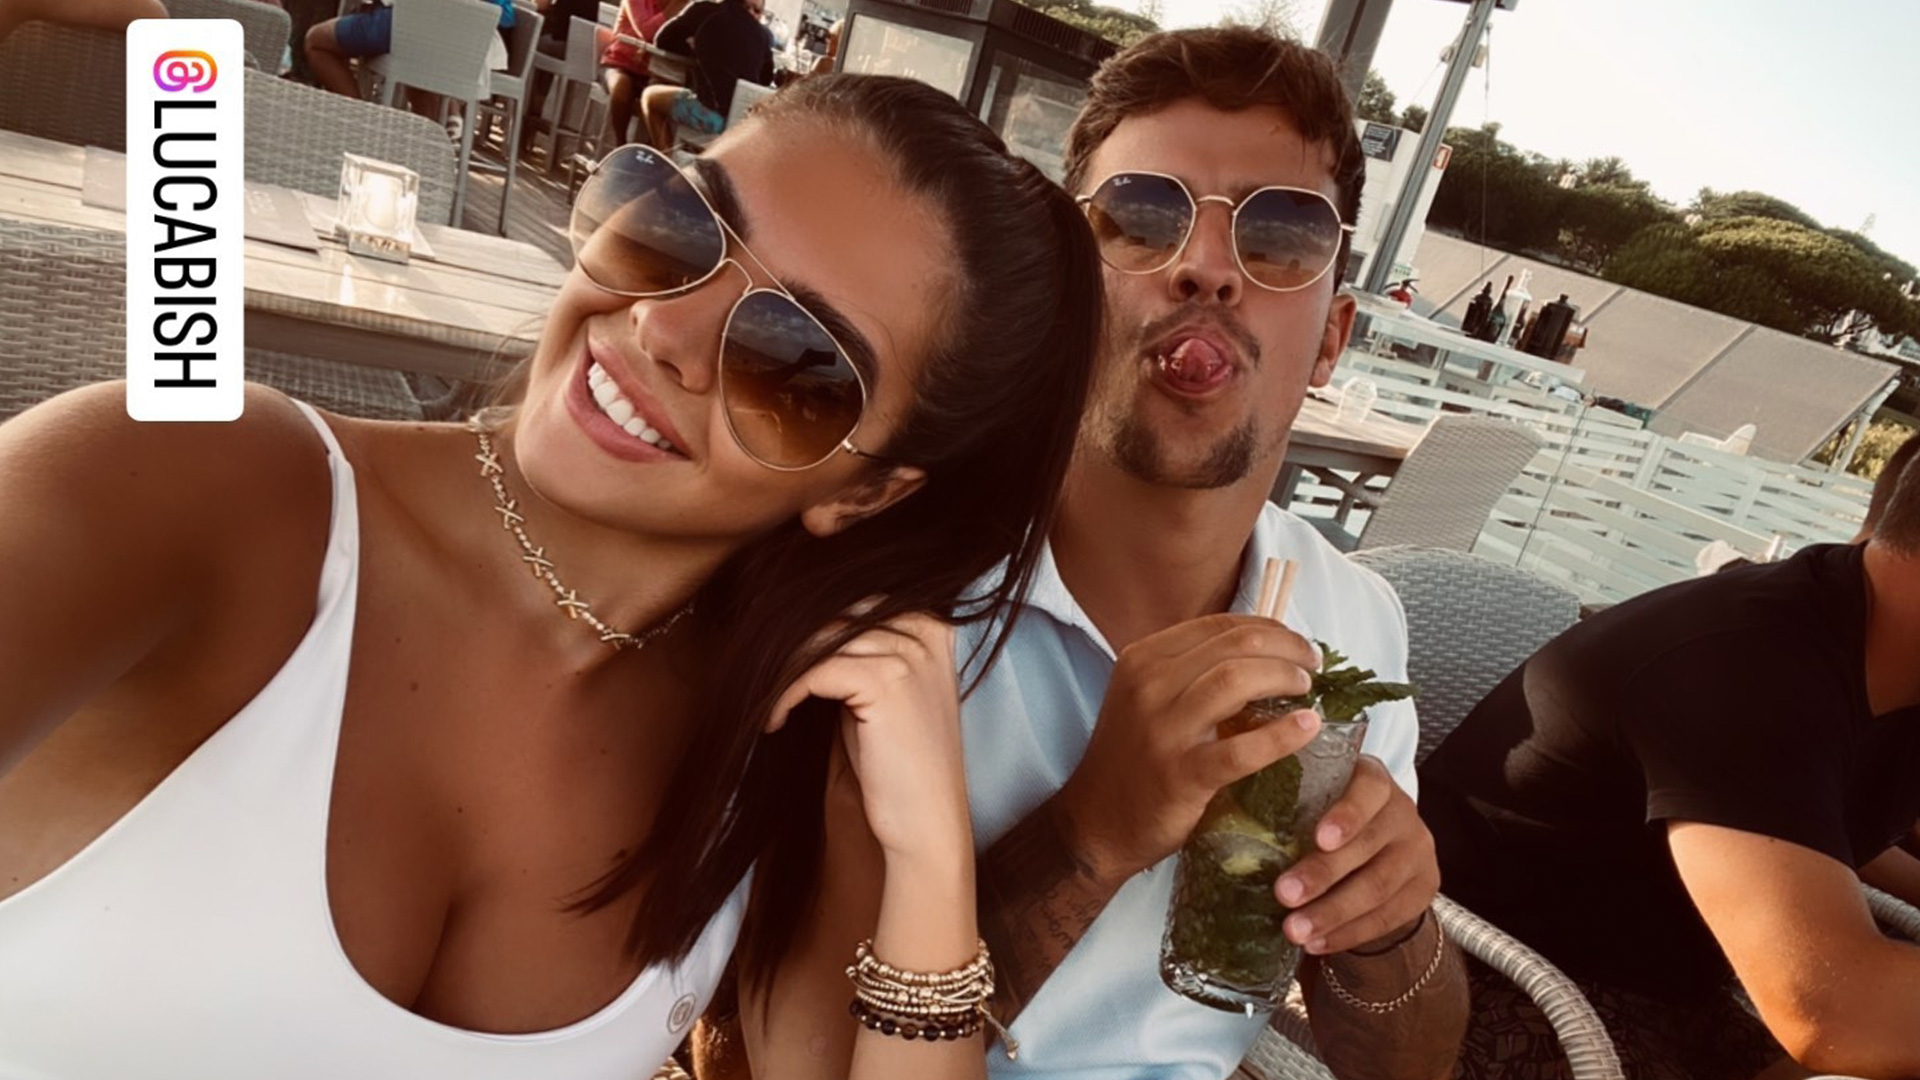 Love Island’s Gemma & Luca take a selfie of their love while on holiday with Michael Owen in Portugal.